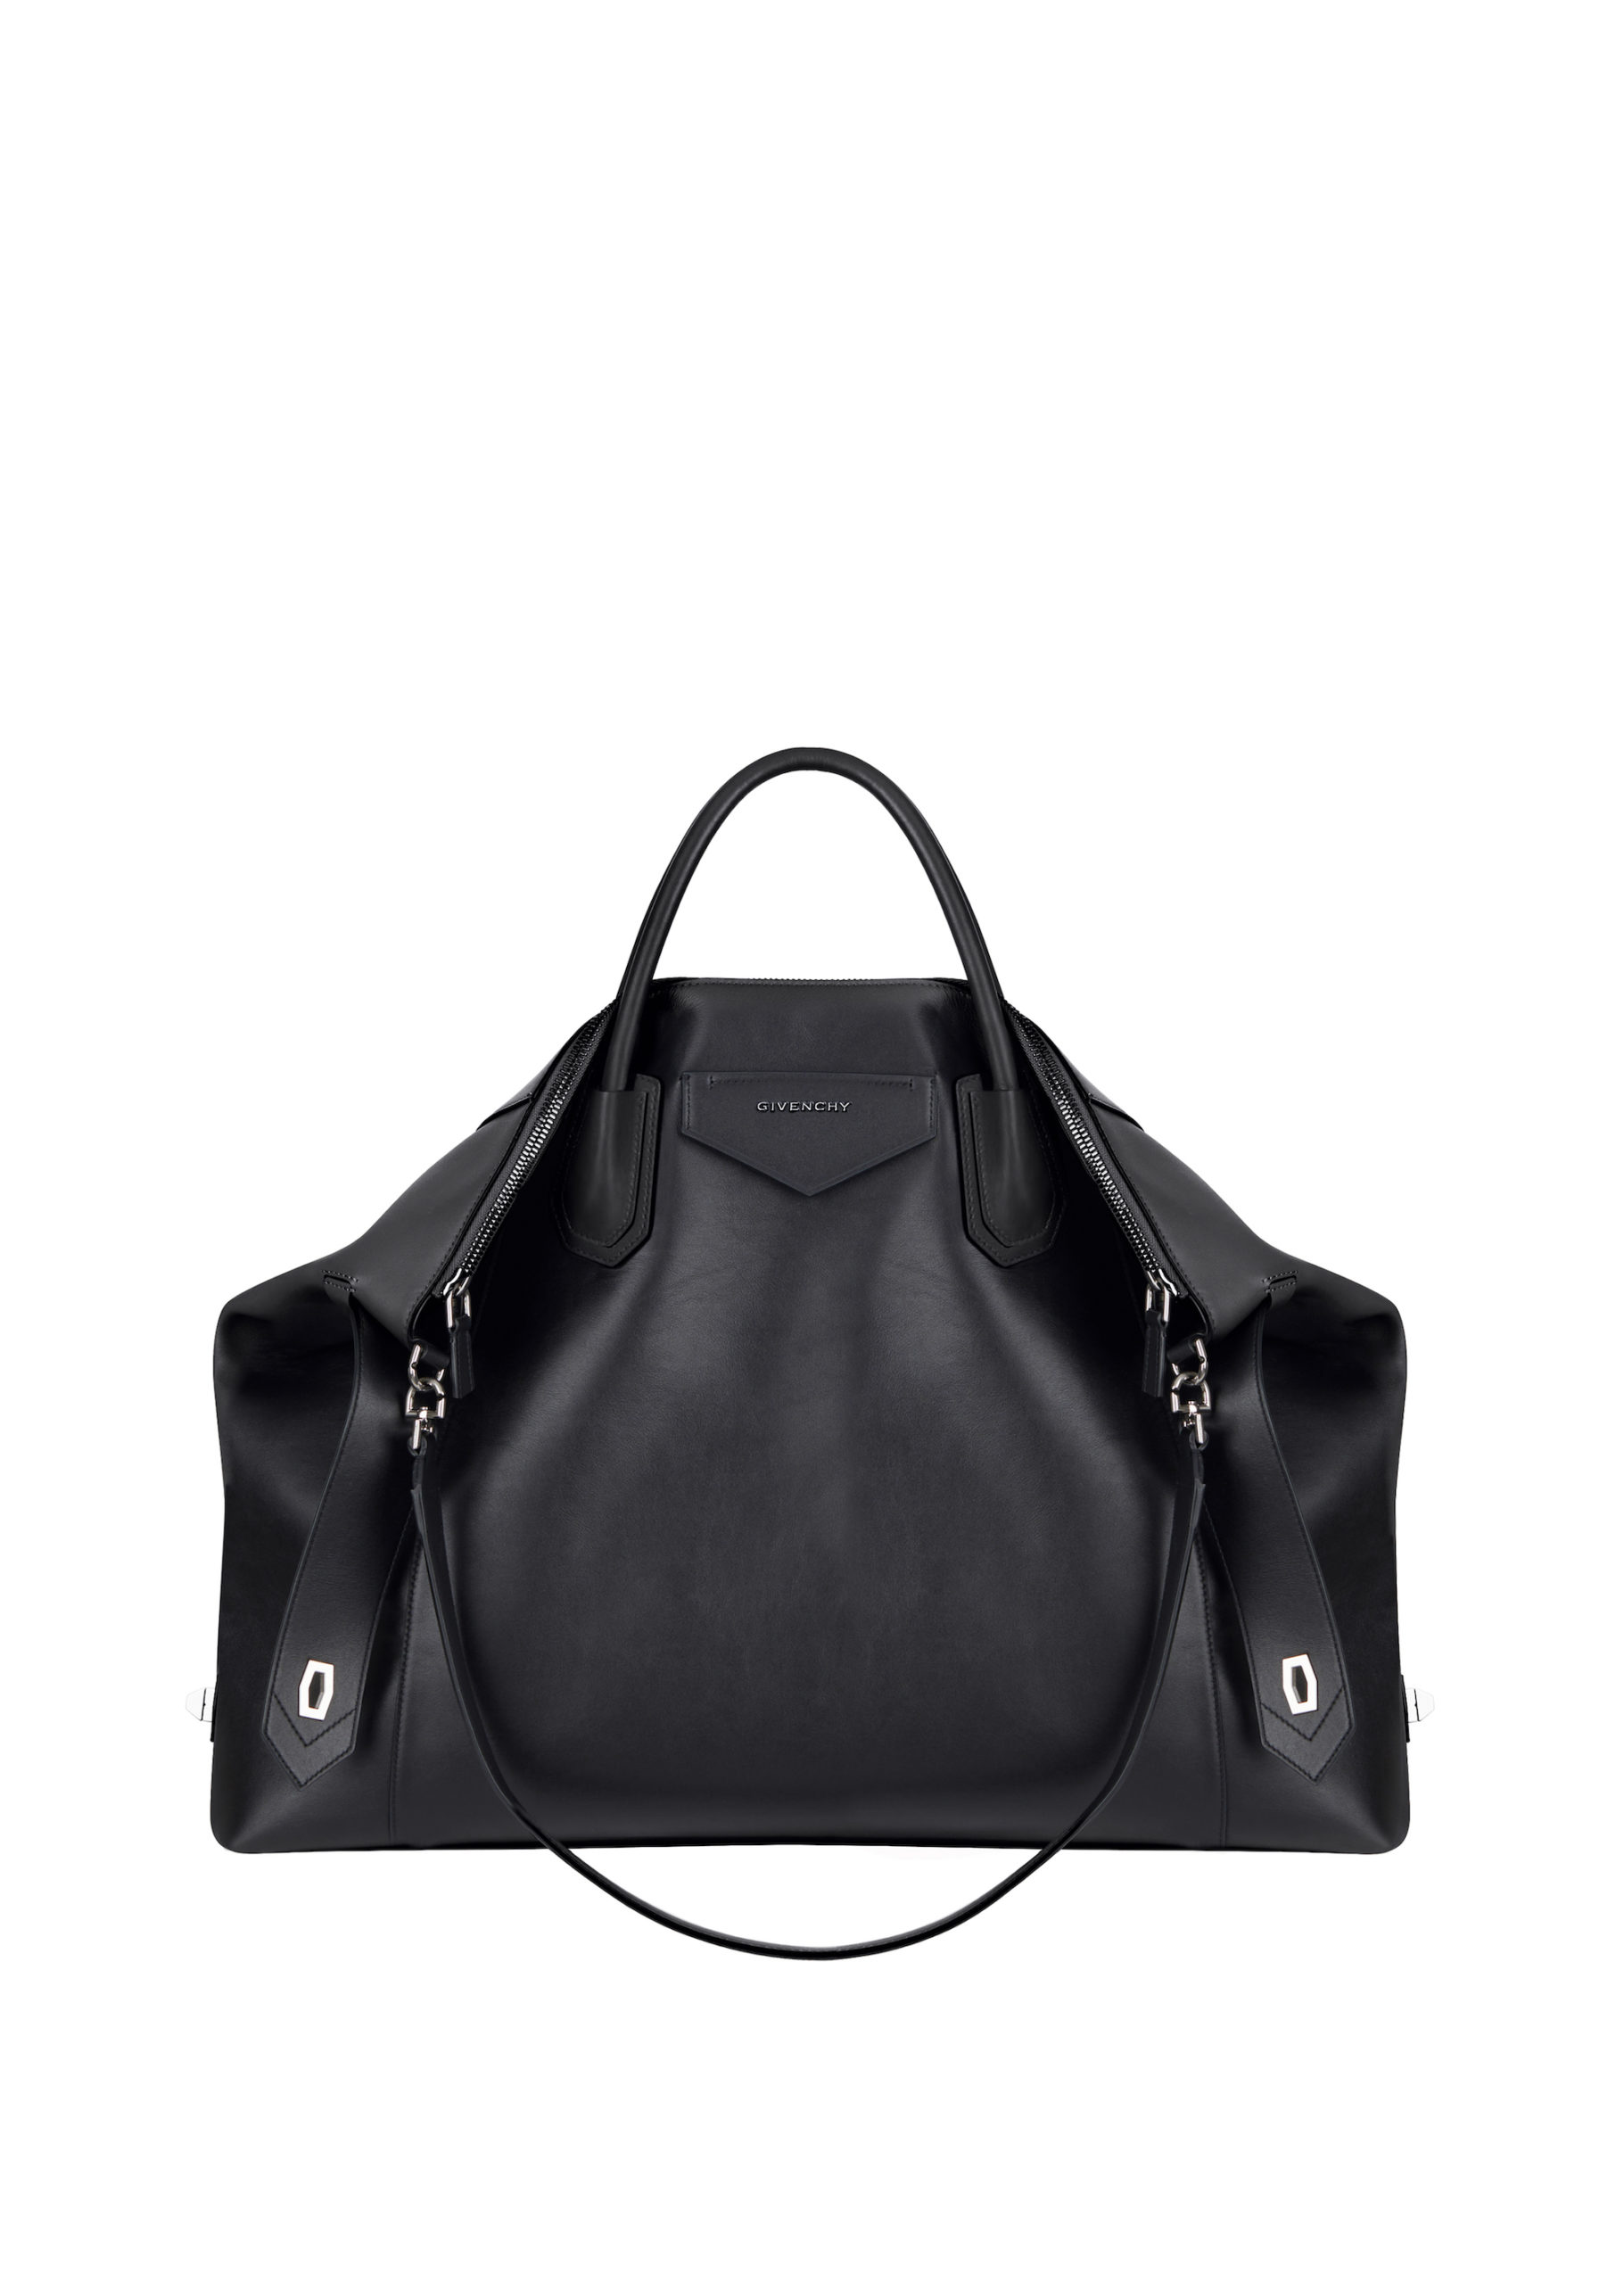 This Givenchy Bag Is A Timeless Staple